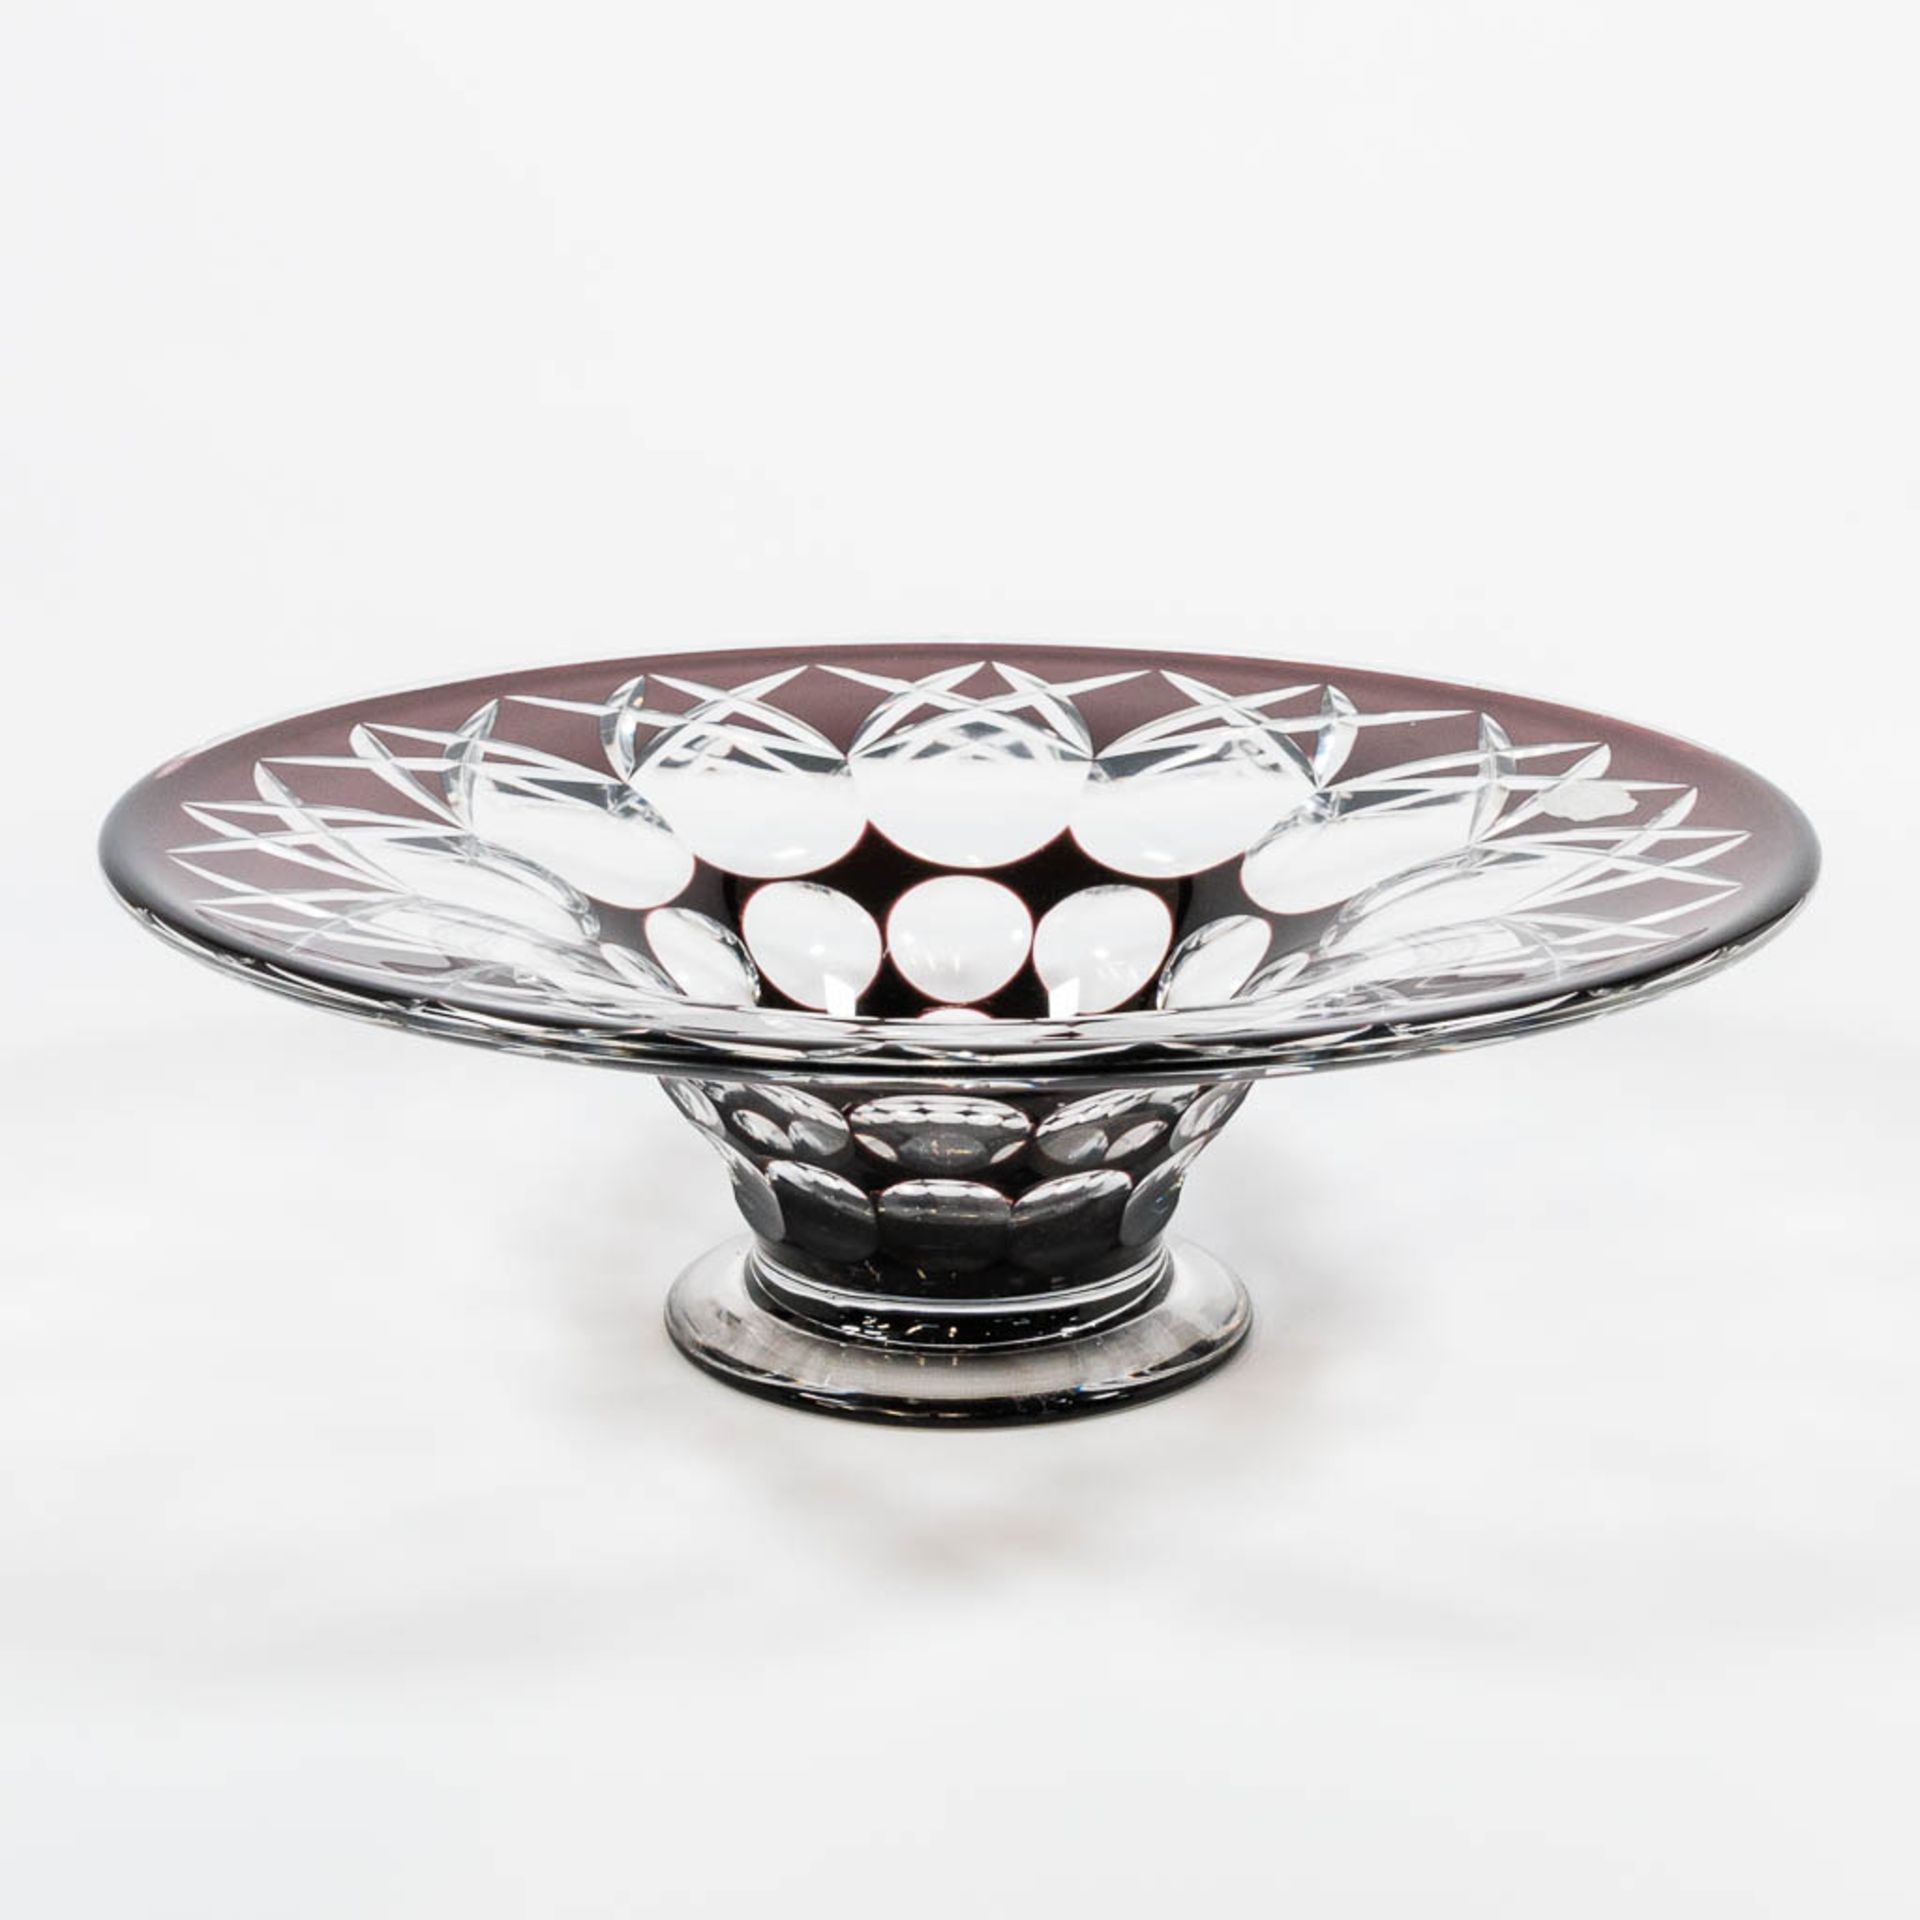 A hand-made Val Saint Lambert fruit bowl Clear and brown crystal, marked with sticker and signature. - Image 4 of 15